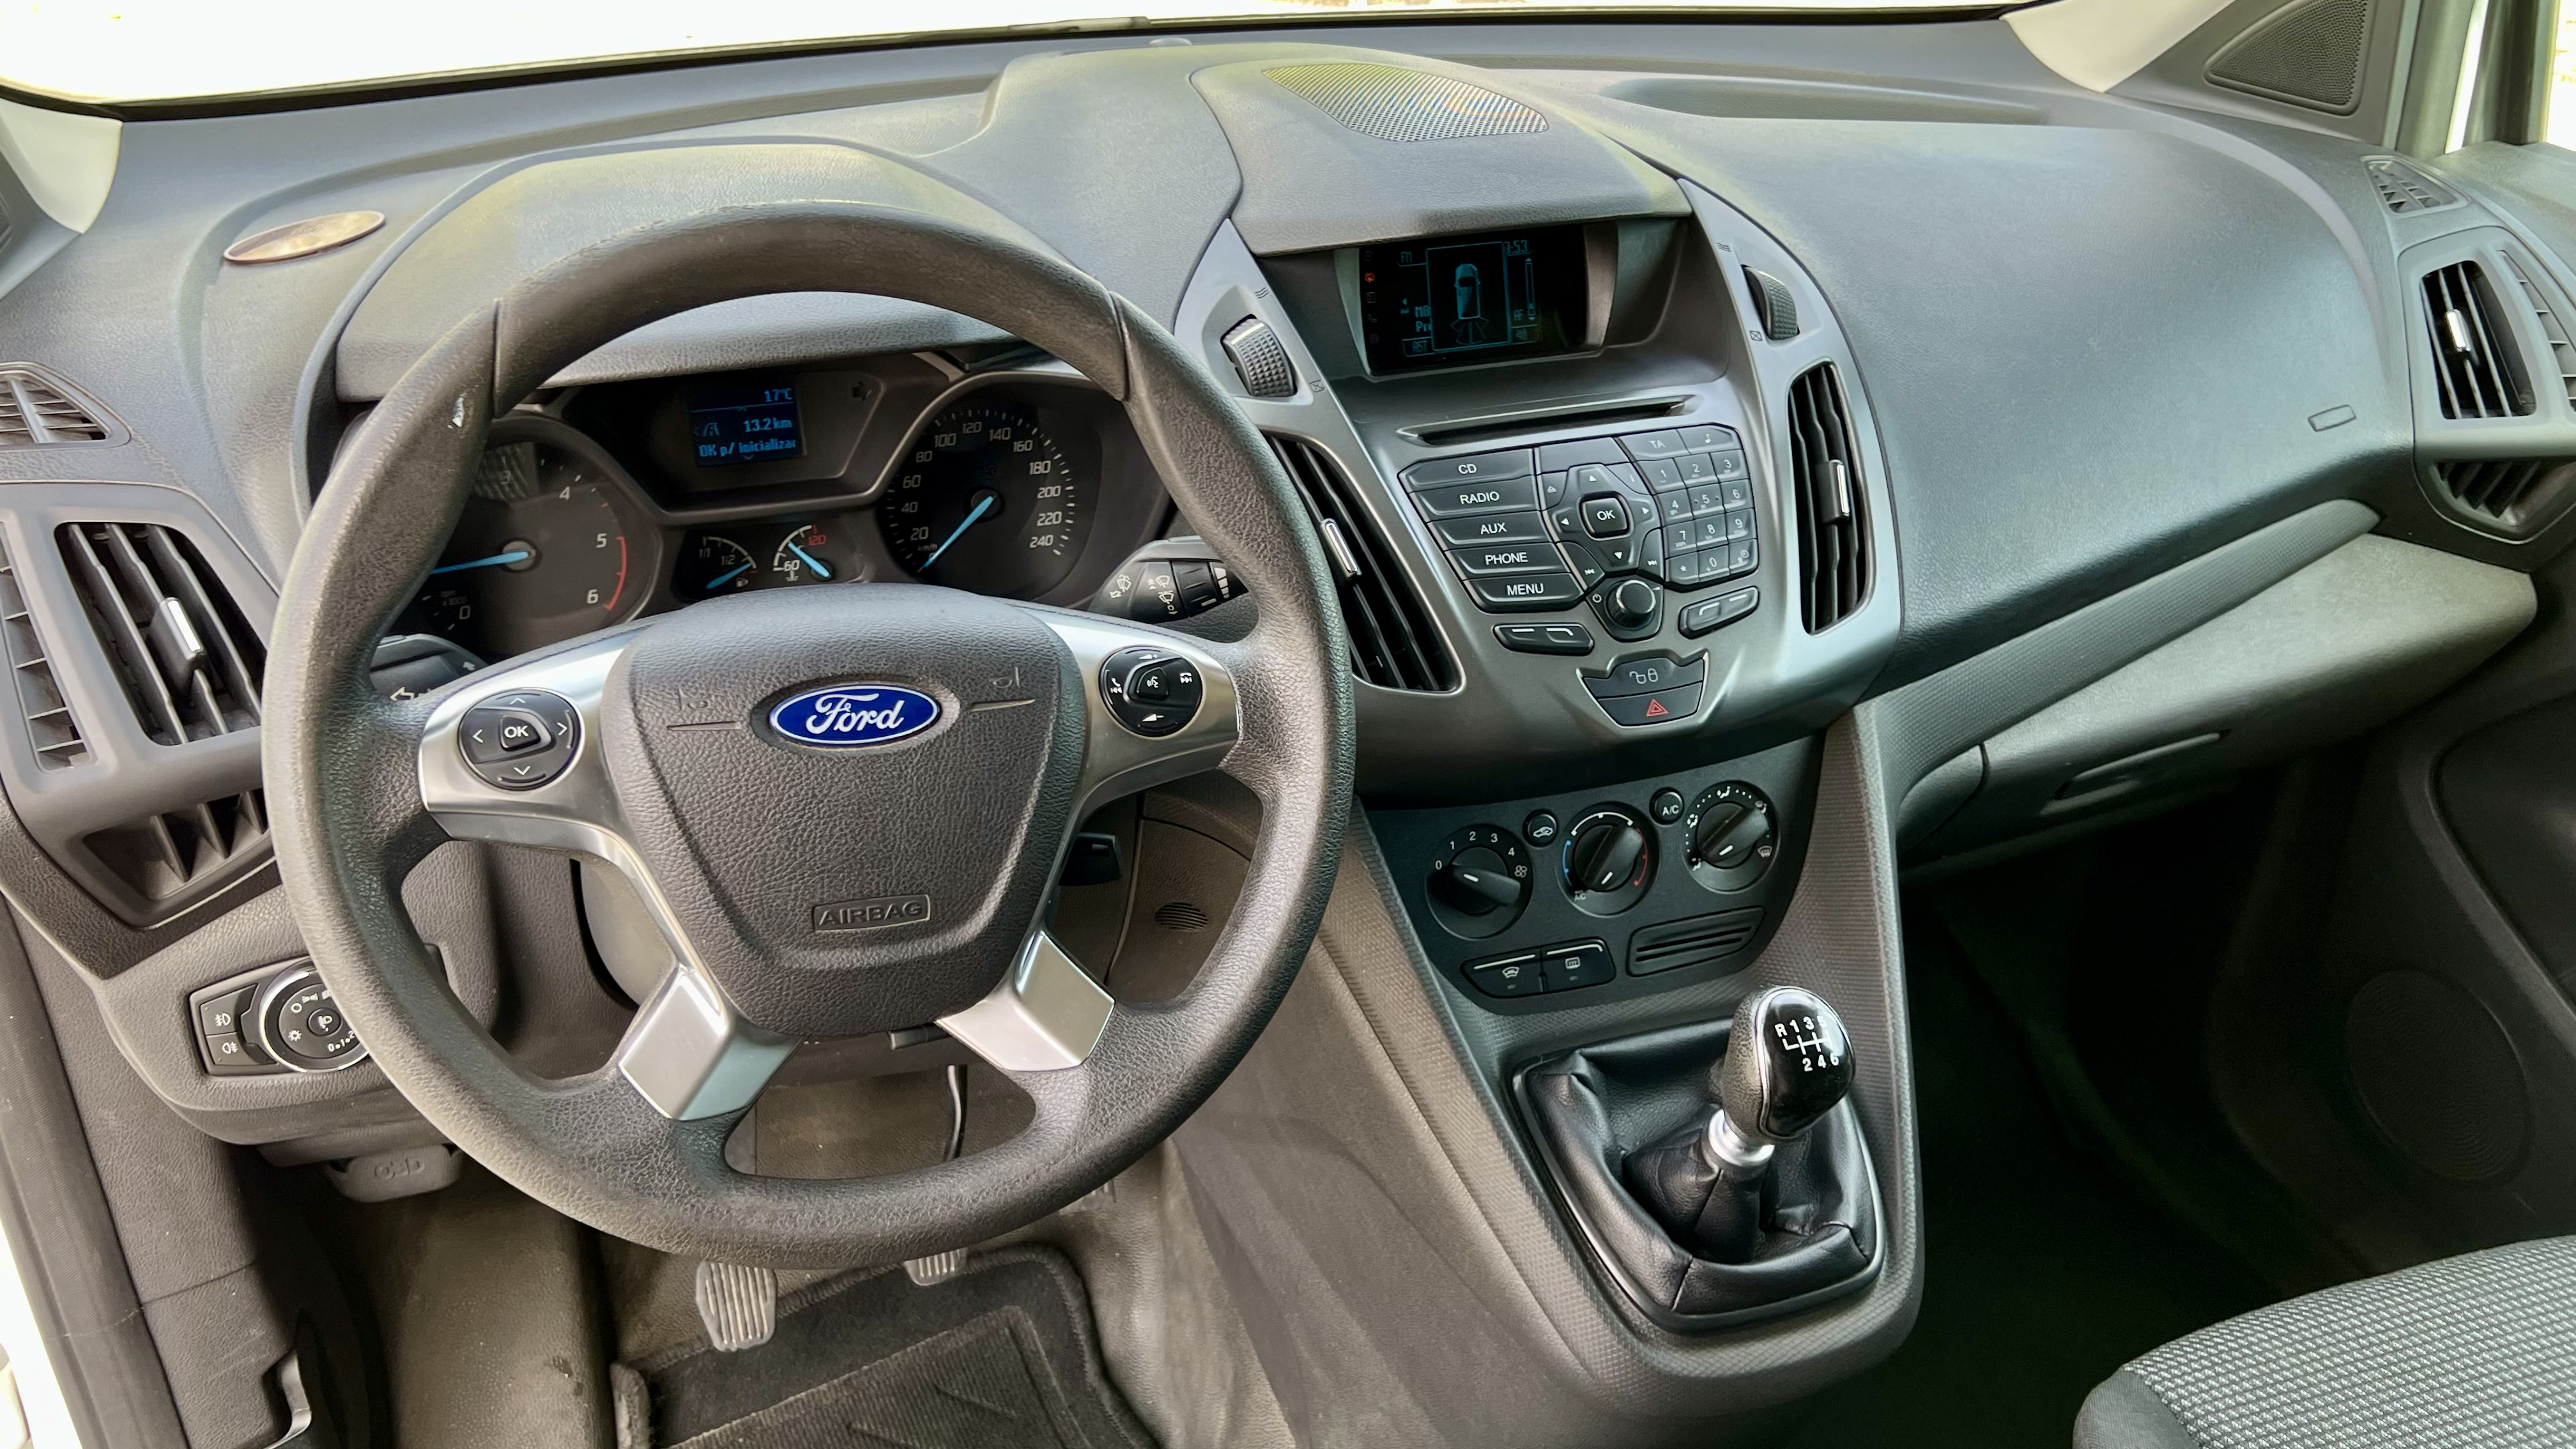 Ford CONNECT 1.6 TDCI 115Cv TREND com IVA 